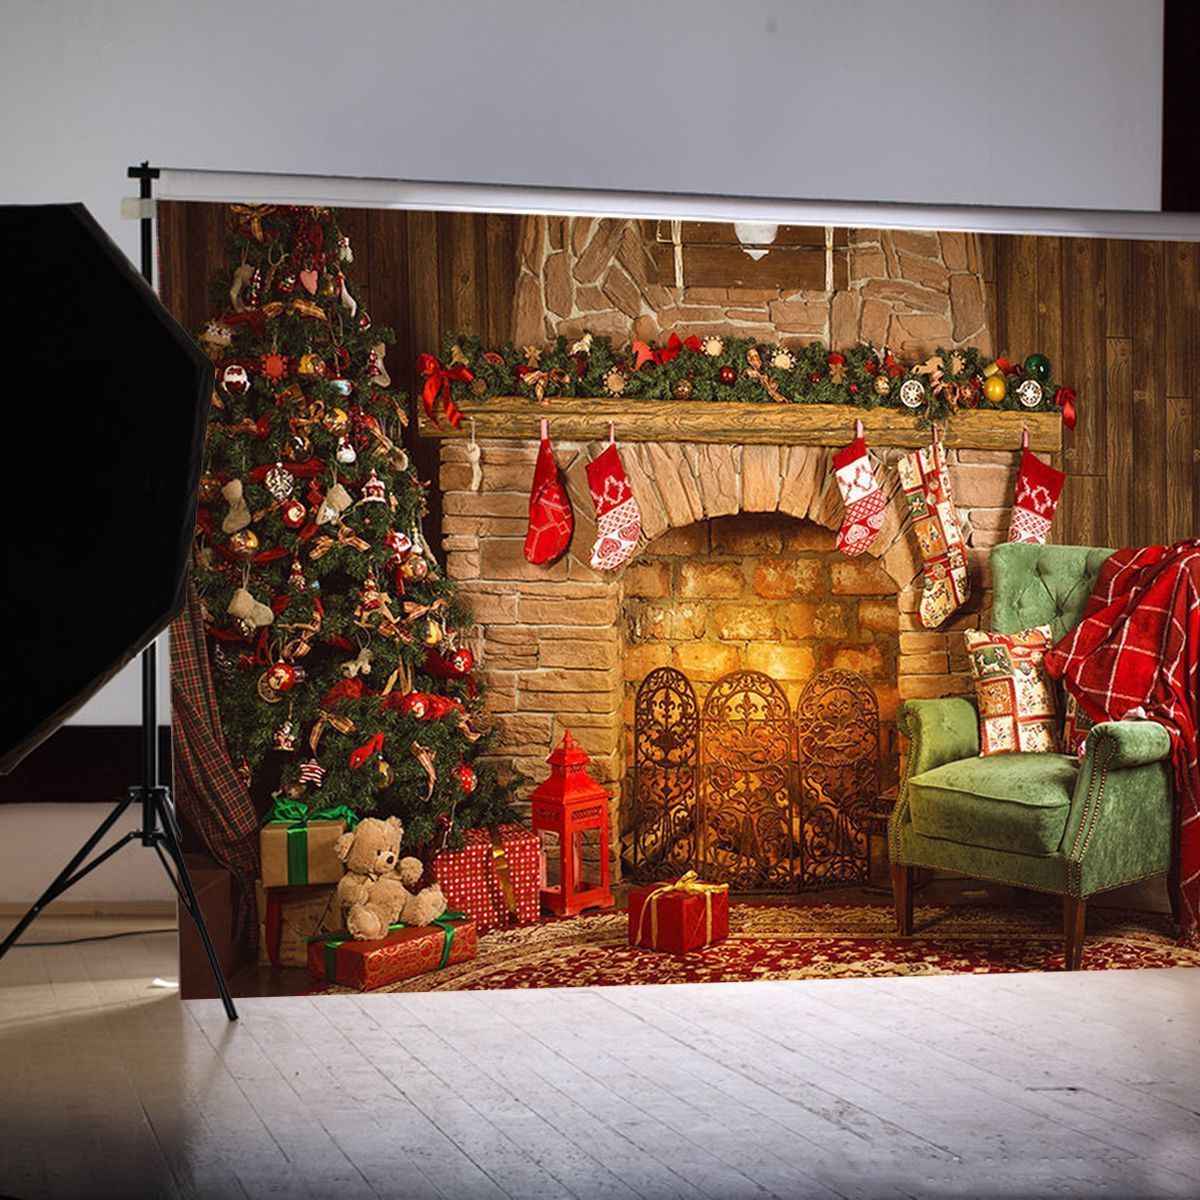 7x5FT-Christmas-Tree-Fireplace-Chair-Gift-Photography-Backdrop-Studio-Prop-Background-1404470